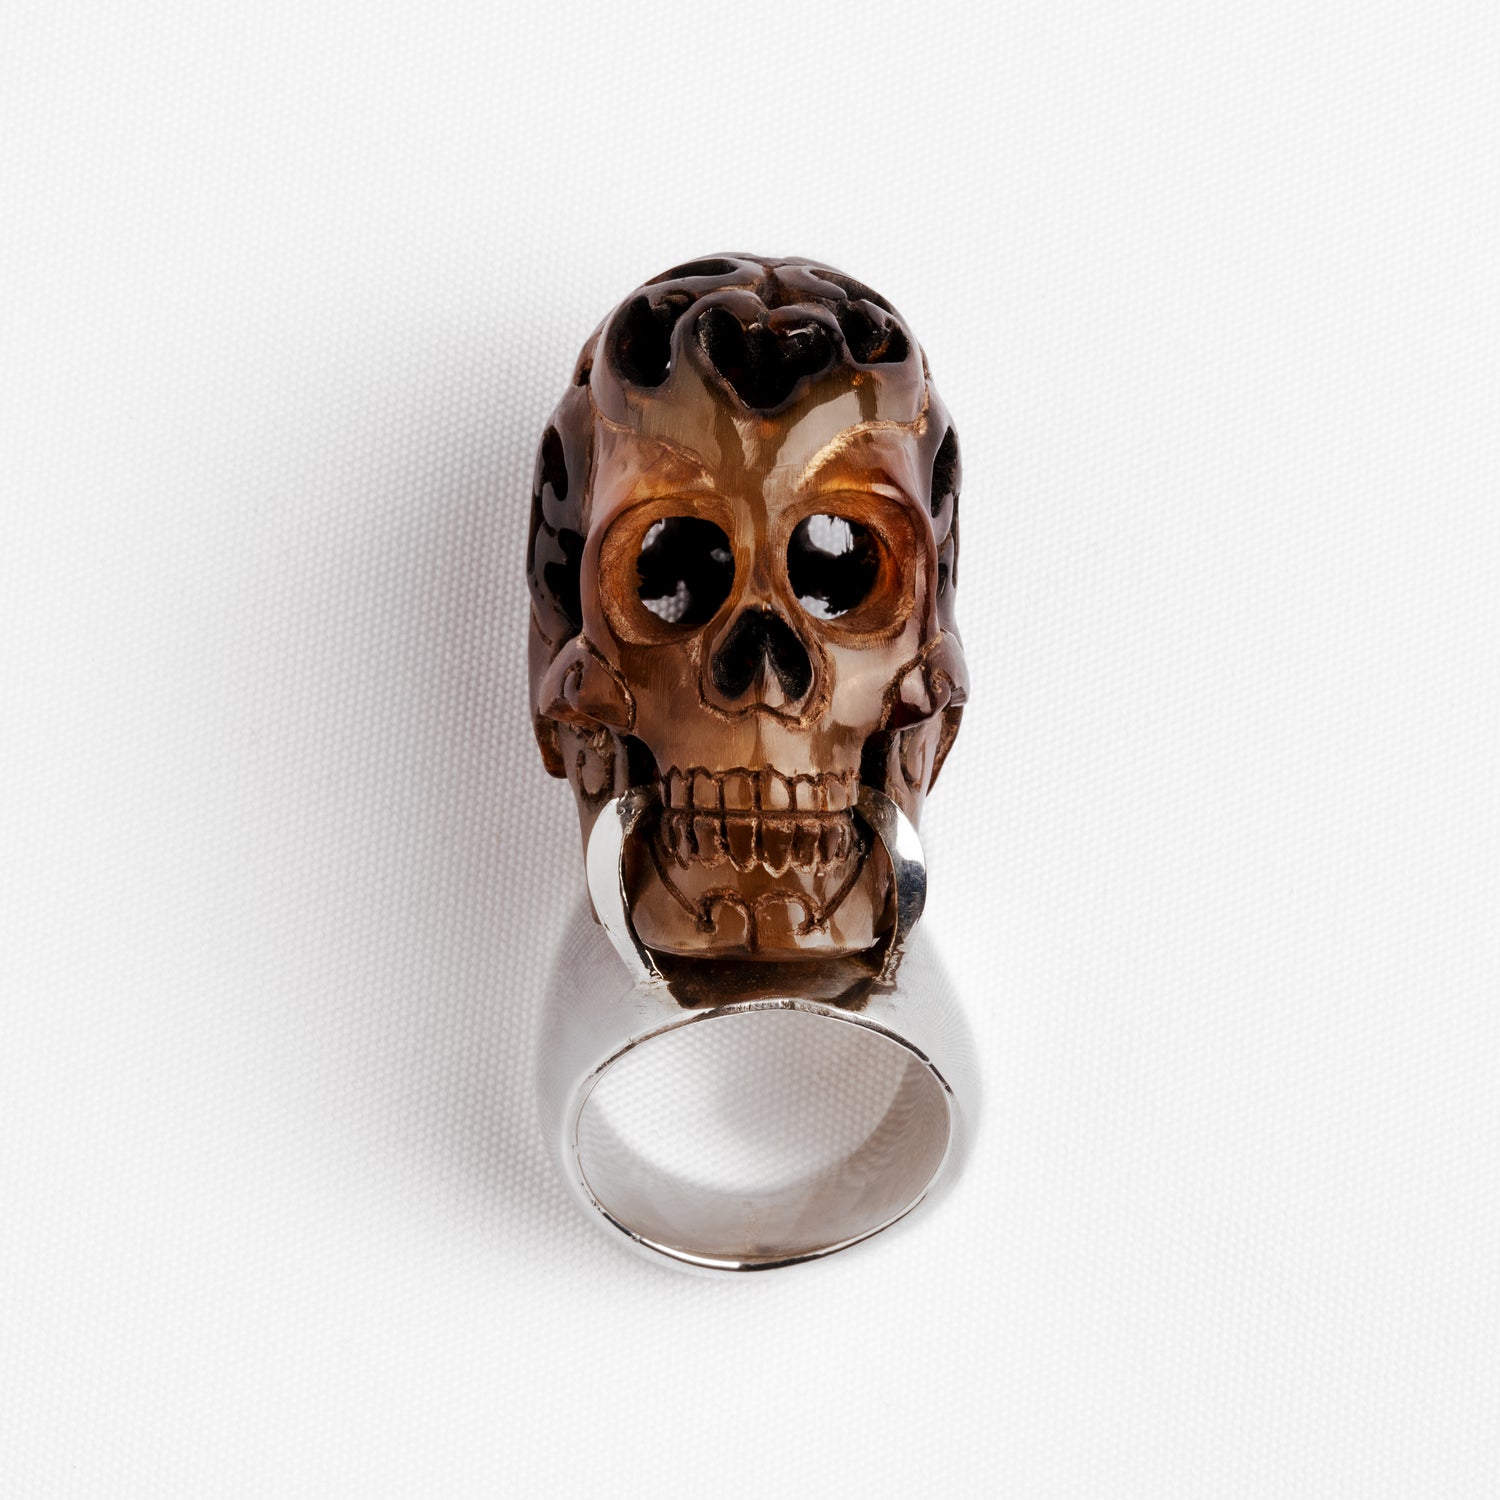 Carved skull and silver ring